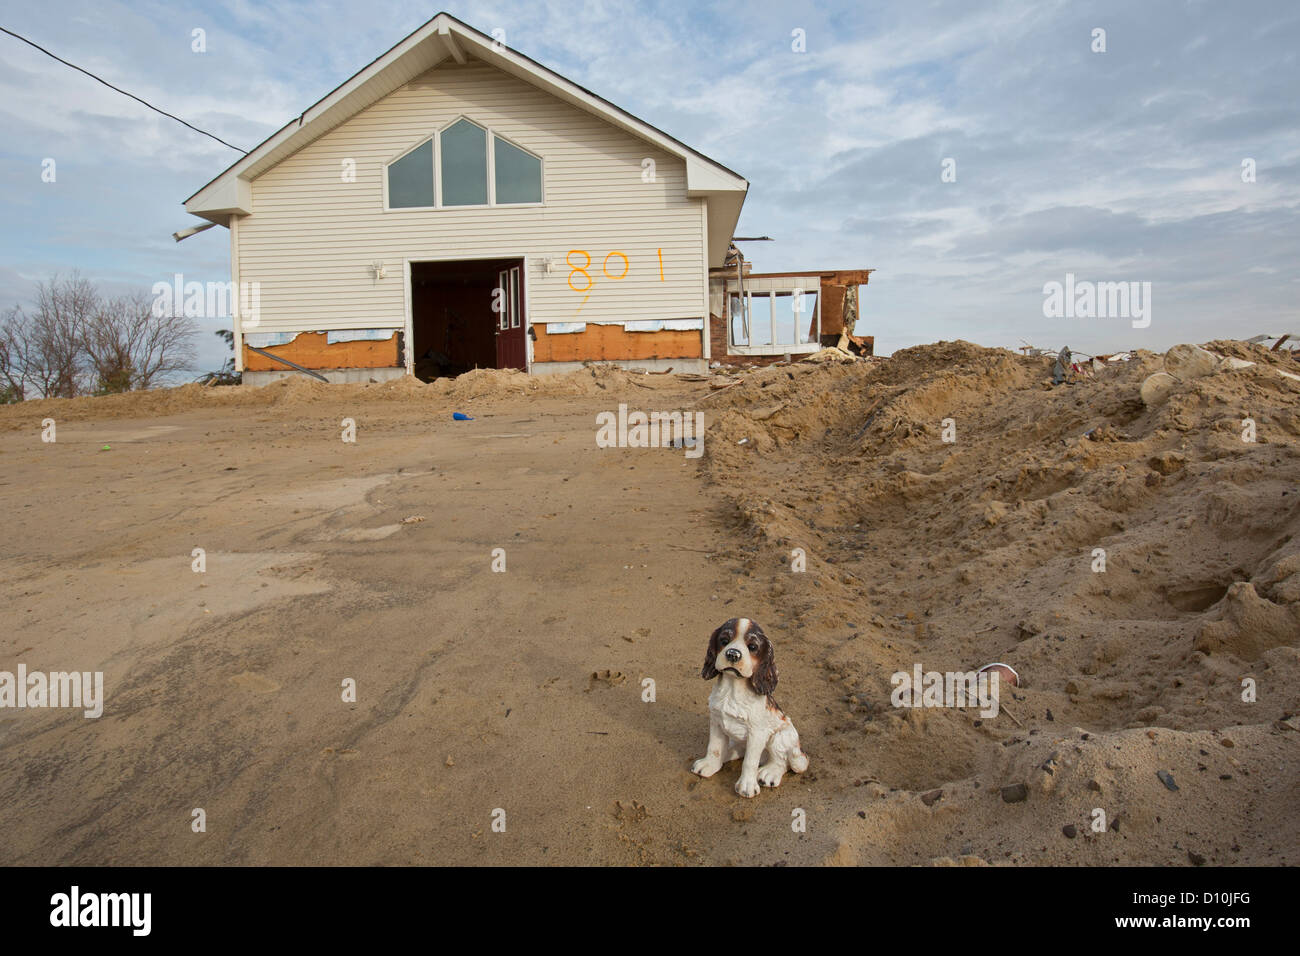 Union Beach, New Jersey - A house on the New Jersey shore severly damaged by Hurricane Sandy. Stock Photo